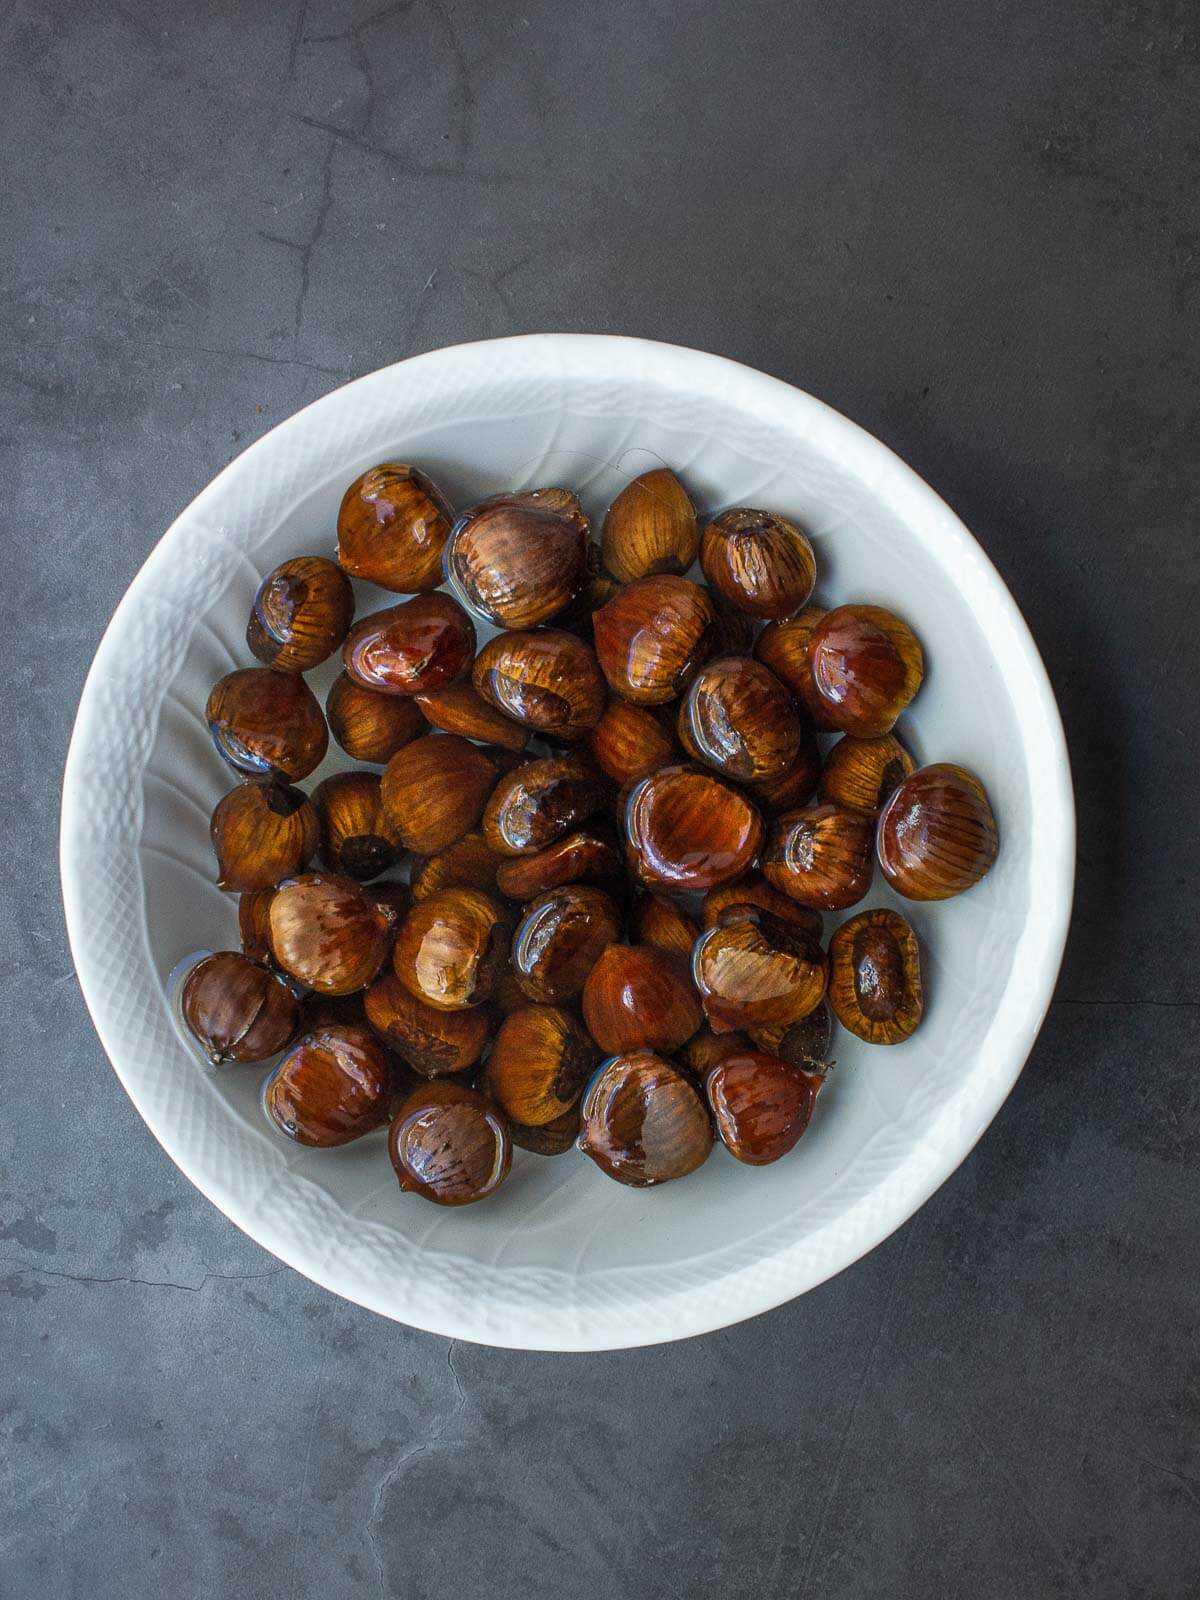 Soaking chestnuts in water.